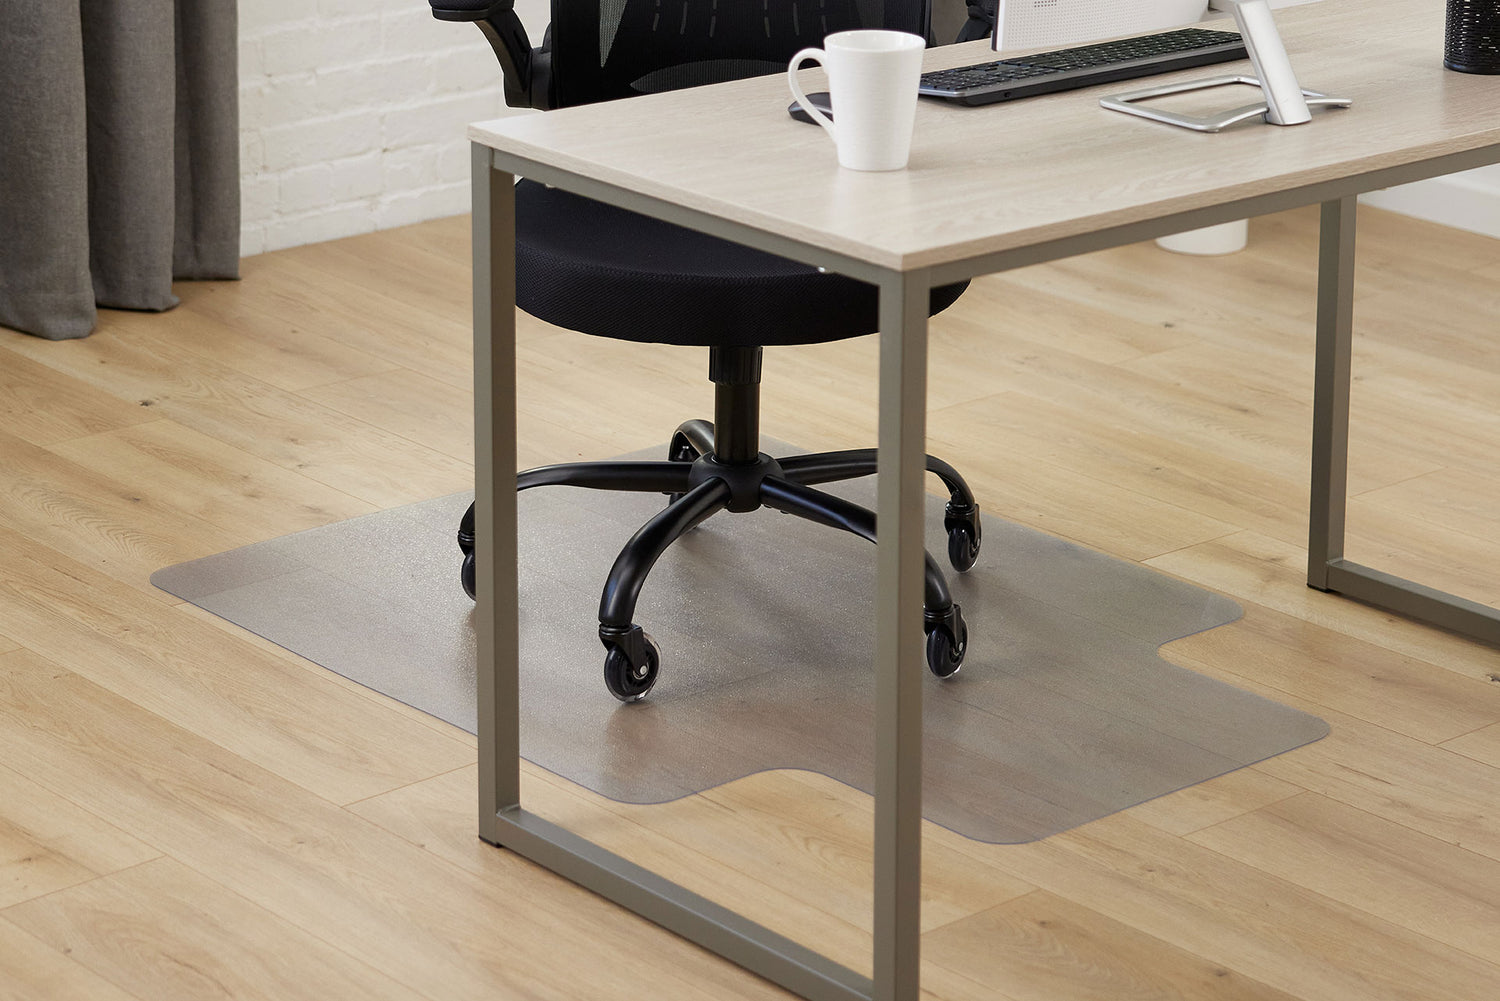 An office with a Gorilla Grip chair desk mat under a rolling chair for floor protection